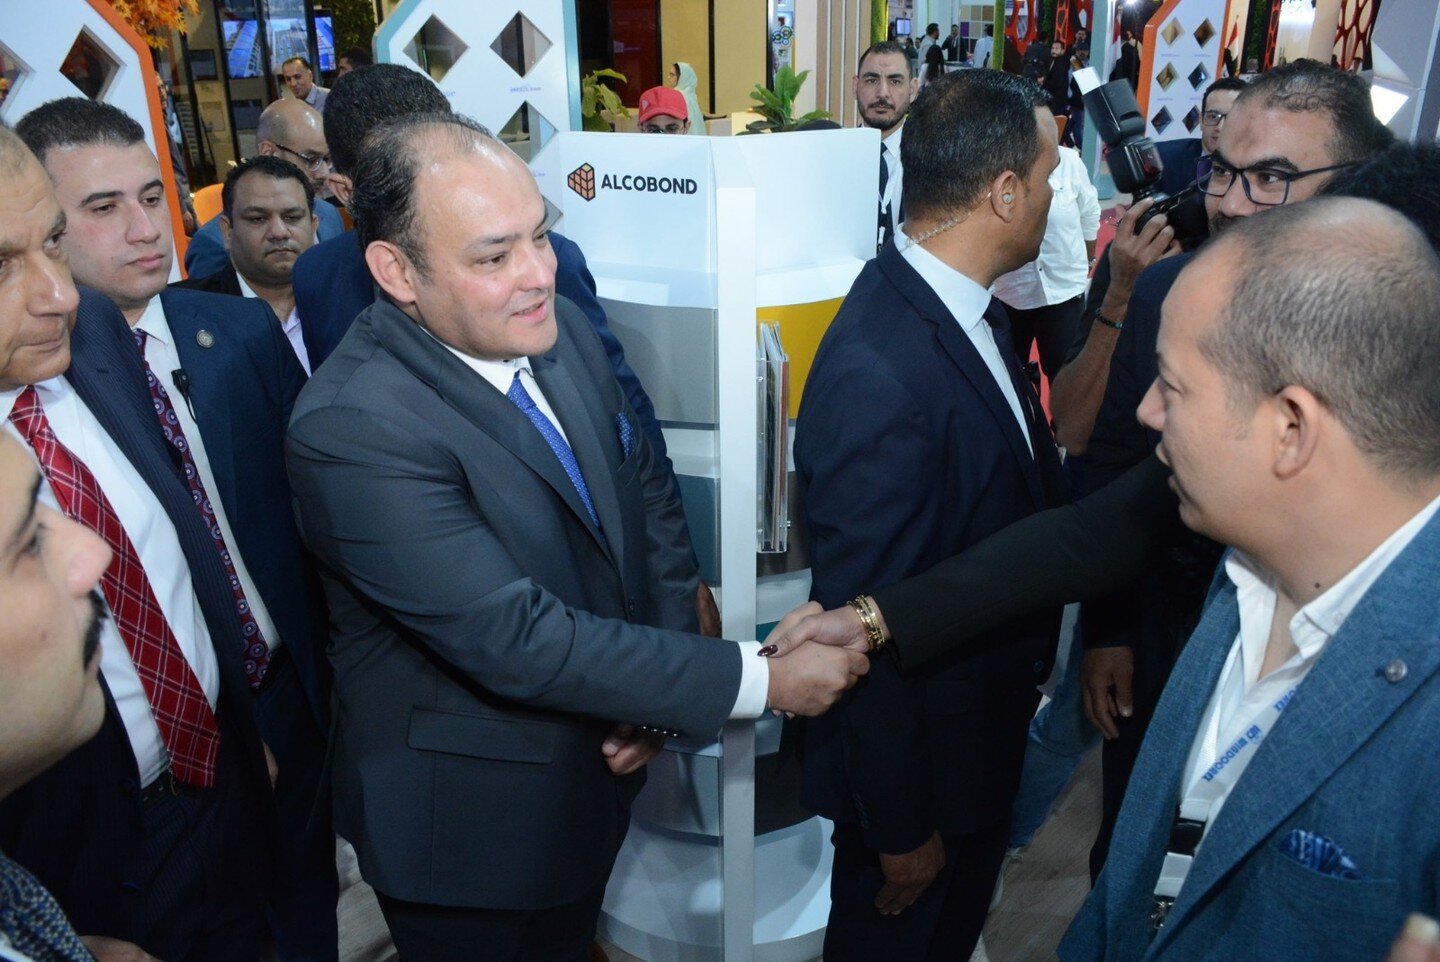 Thrilled to be a part of another successful Windoorex (@windoorex.me) exhibition in Cairo, showcasing our latest products and finishes.

We were honored to have the Minister of Trade and Industry (@mti_egypt) join us and witness our commitment toward